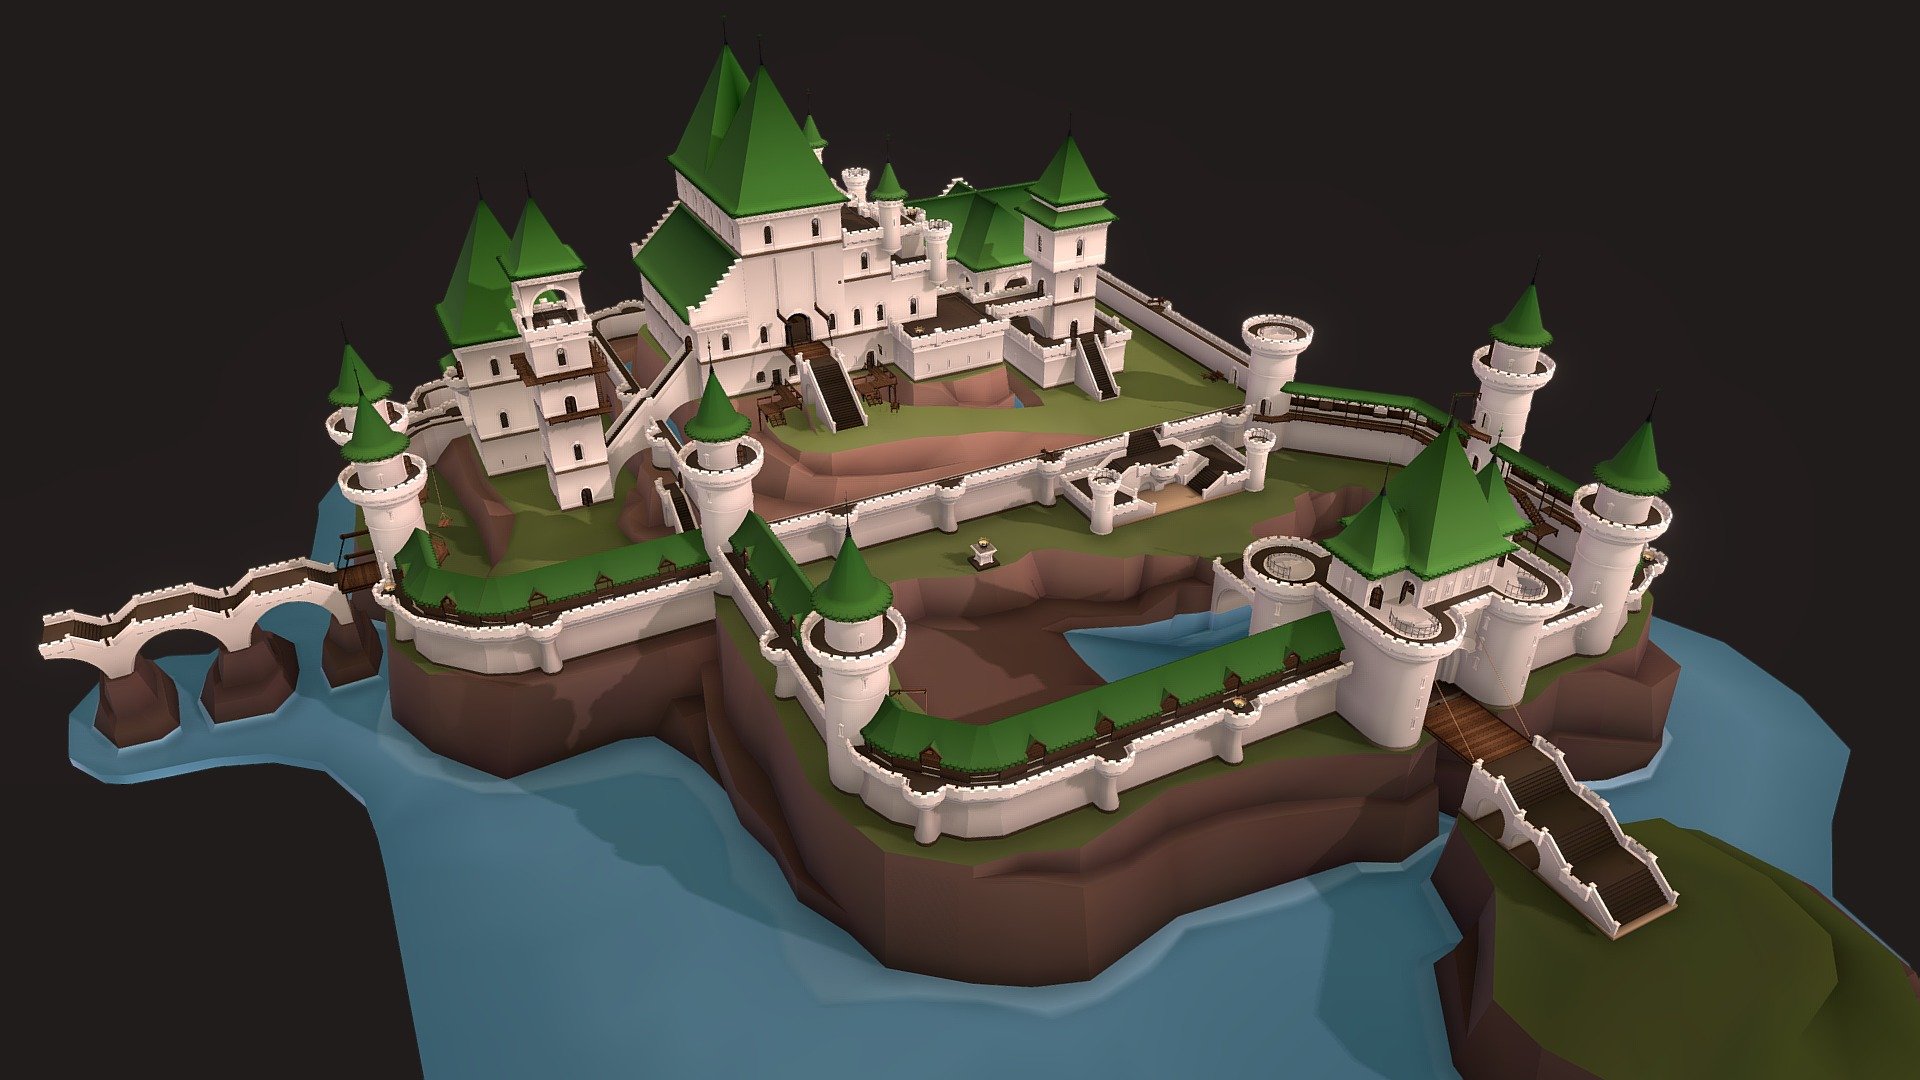 A modular building kit designed for quick castle construction in VR by end user - Castle Building Kit - 3D model by Paul Merrell (@paulmerrell) 3d model